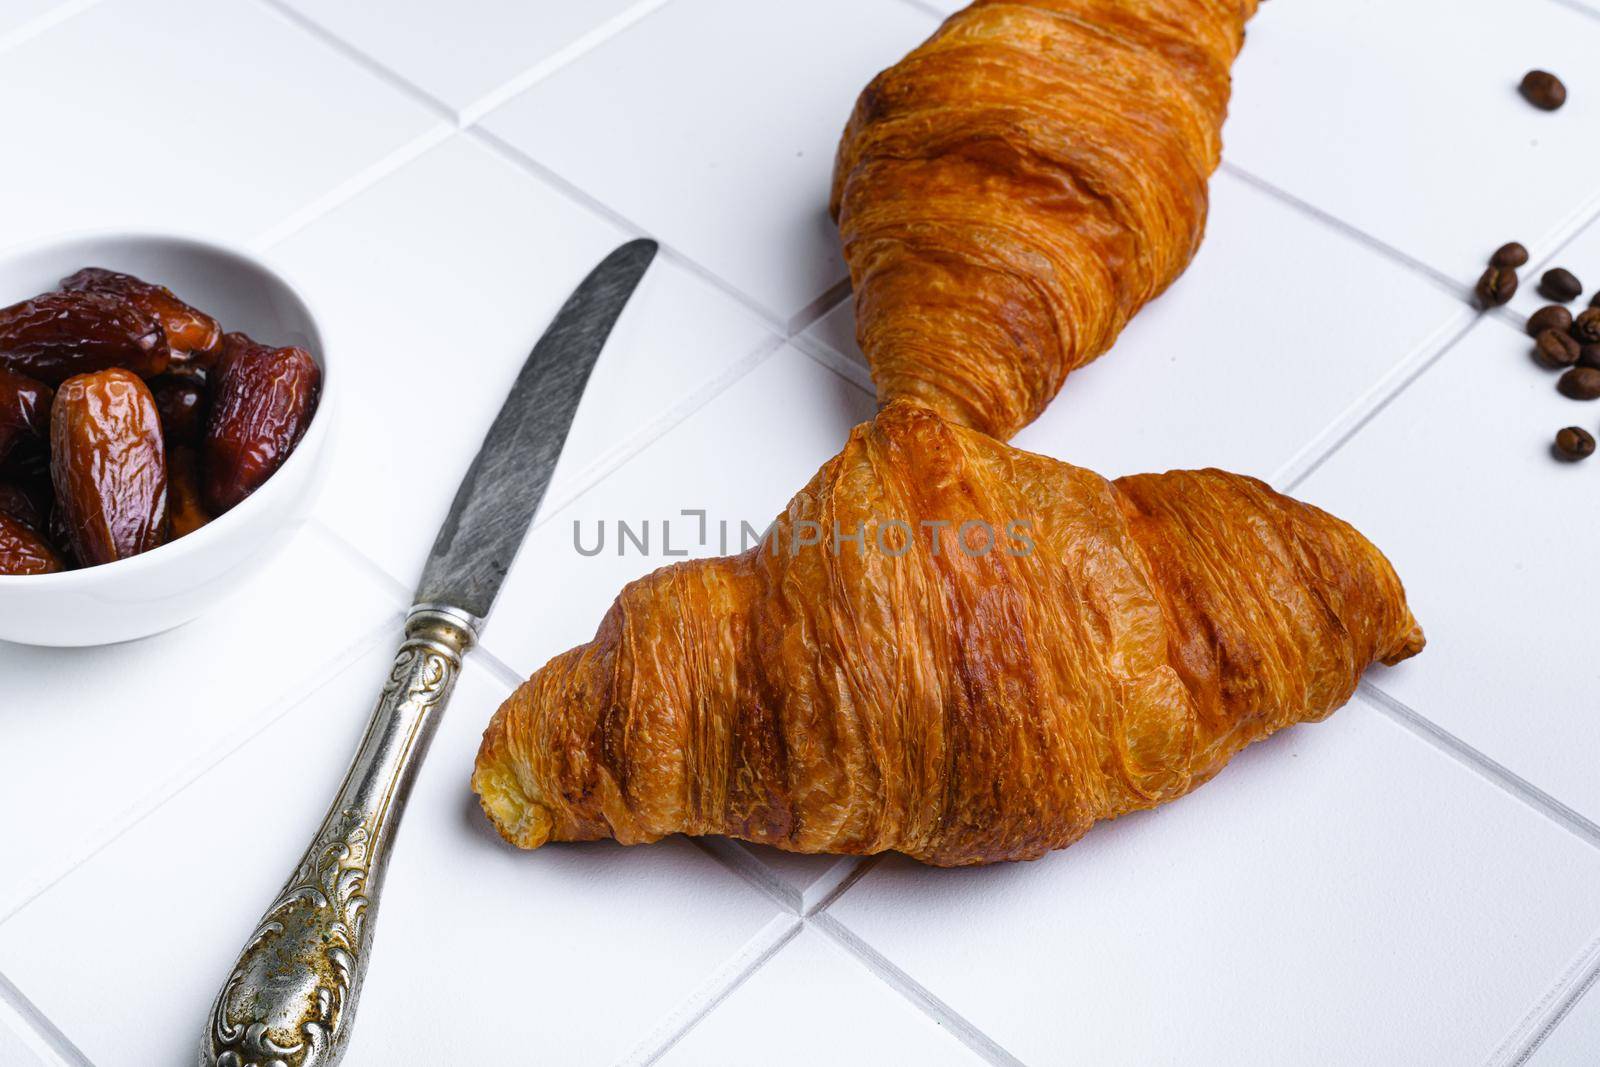 Warm butter creamy baked croissants, on white ceramic squared tile table background